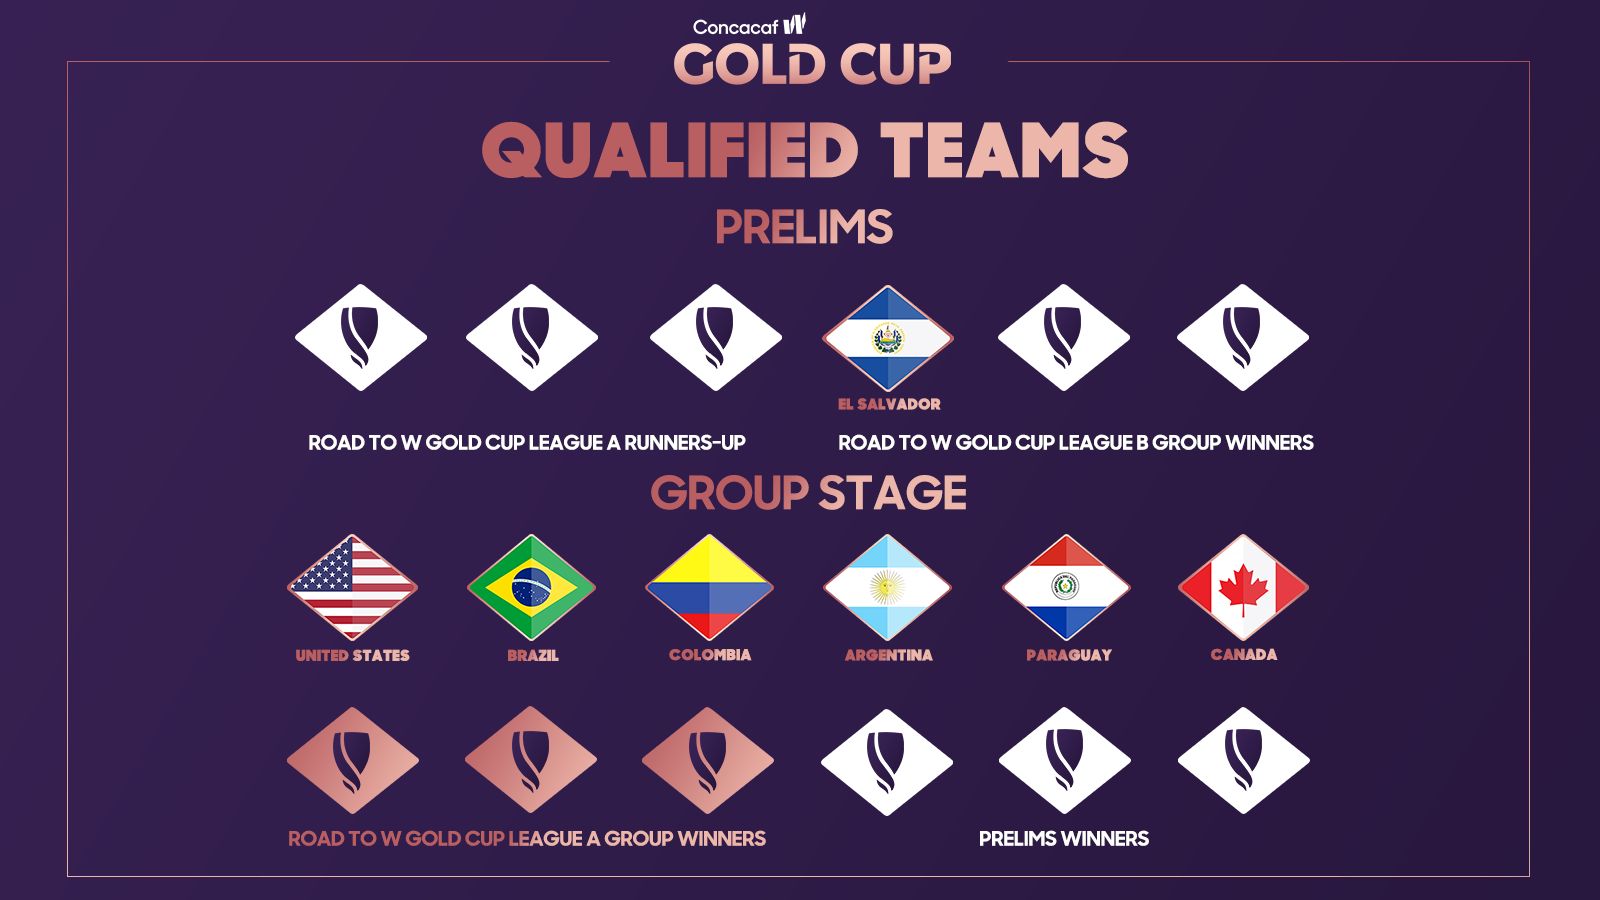 These are the qualified teams for the 2024 CONCACAF W Gold Cup!